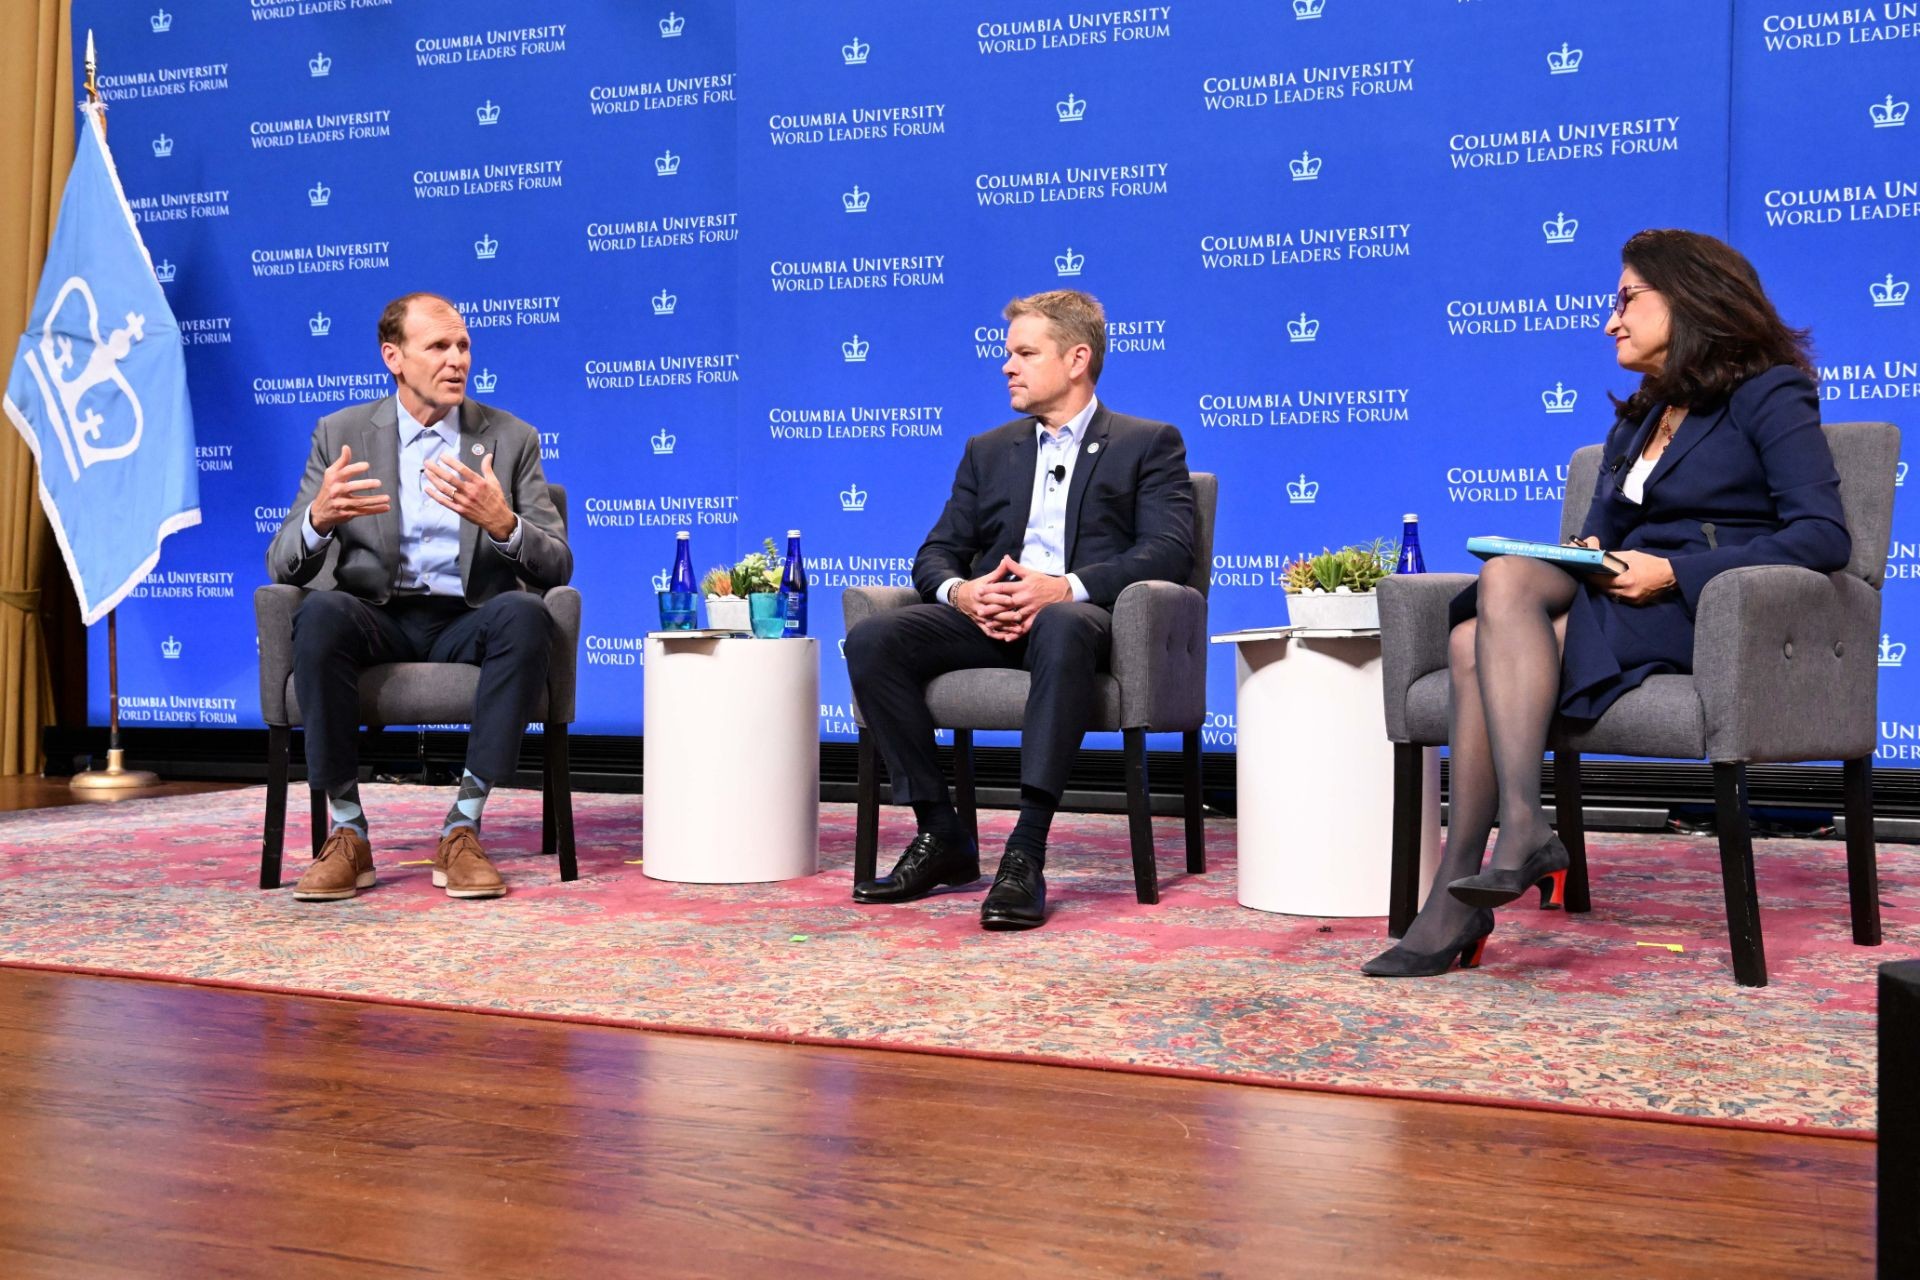 Co-Founders of Water.Org and WaterEquity Gary White (left), Matt Damon (middle), and President Minouche Shafik (right) during the World Leaders Forum